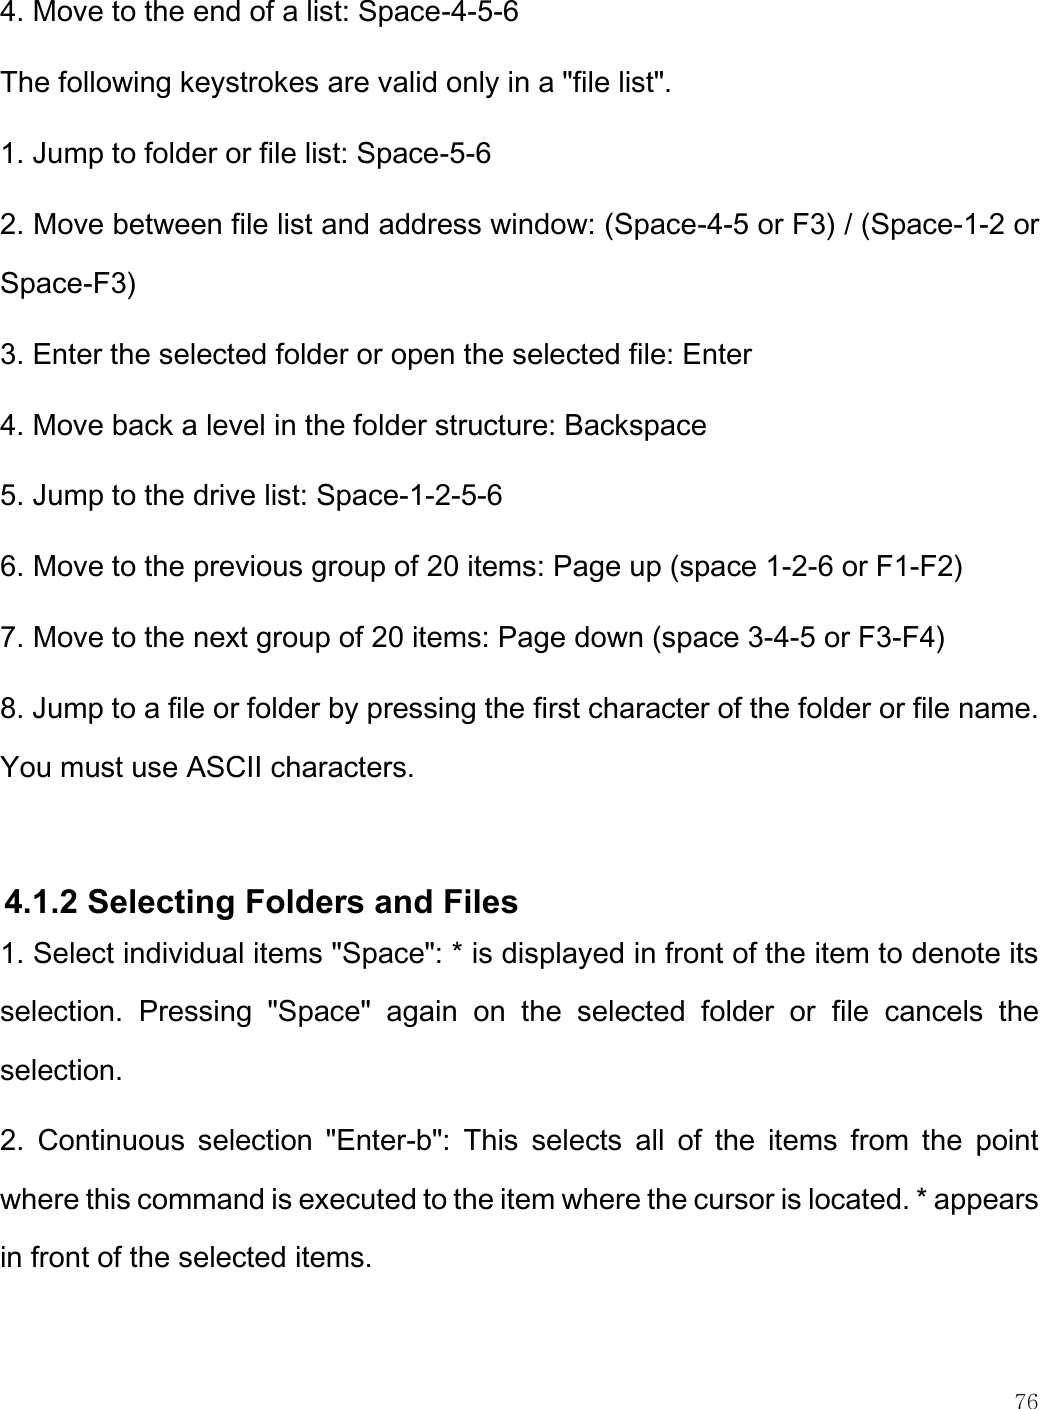    76  4. Move to the end of a list: Space-4-5-6 The following keystrokes are valid only in a &quot;file list&quot;. 1. Jump to folder or file list: Space-5-6 2. Move between file list and address window: (Space-4-5 or F3) / (Space-1-2 or Space-F3) 3. Enter the selected folder or open the selected file: Enter 4. Move back a level in the folder structure: Backspace 5. Jump to the drive list: Space-1-2-5-6 6. Move to the previous group of 20 items: Page up (space 1-2-6 or F1-F2) 7. Move to the next group of 20 items: Page down (space 3-4-5 or F3-F4) 8. Jump to a file or folder by pressing the first character of the folder or file name. You must use ASCII characters.  4.1.2 Selecting Folders and Files 1. Select individual items &quot;Space&quot;: * is displayed in front of the item to denote its selection.  Pressing  &quot;Space&quot;  again  on  the  selected  folder  or  file  cancels  the selection. 2.  Continuous  selection  &quot;Enter-b&quot;:  This  selects  all  of  the  items  from  the  point where this command is executed to the item where the cursor is located. * appears in front of the selected items. 